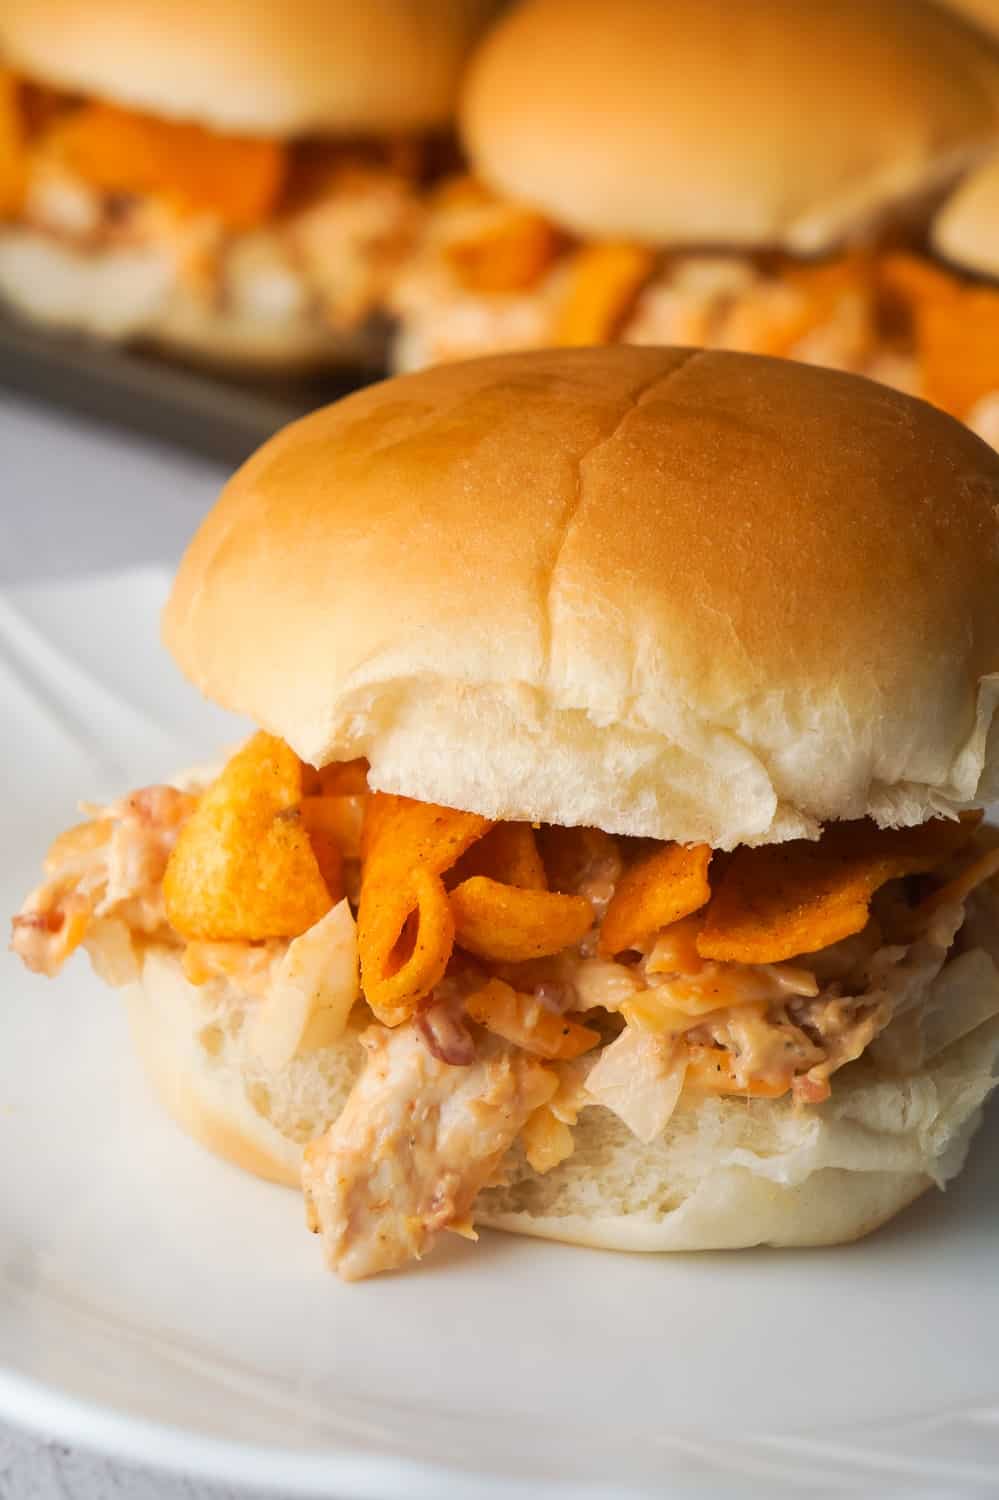 BBQ Fritos Chicken Sandwiches are an easy dinner recipe using shredded chicken and loaded with BBQ corn chips, cheddar cheese and bacon. This recipe is perfect for summer because if you use a grocery store rotisserie chicken you won't even have to turn on the oven.